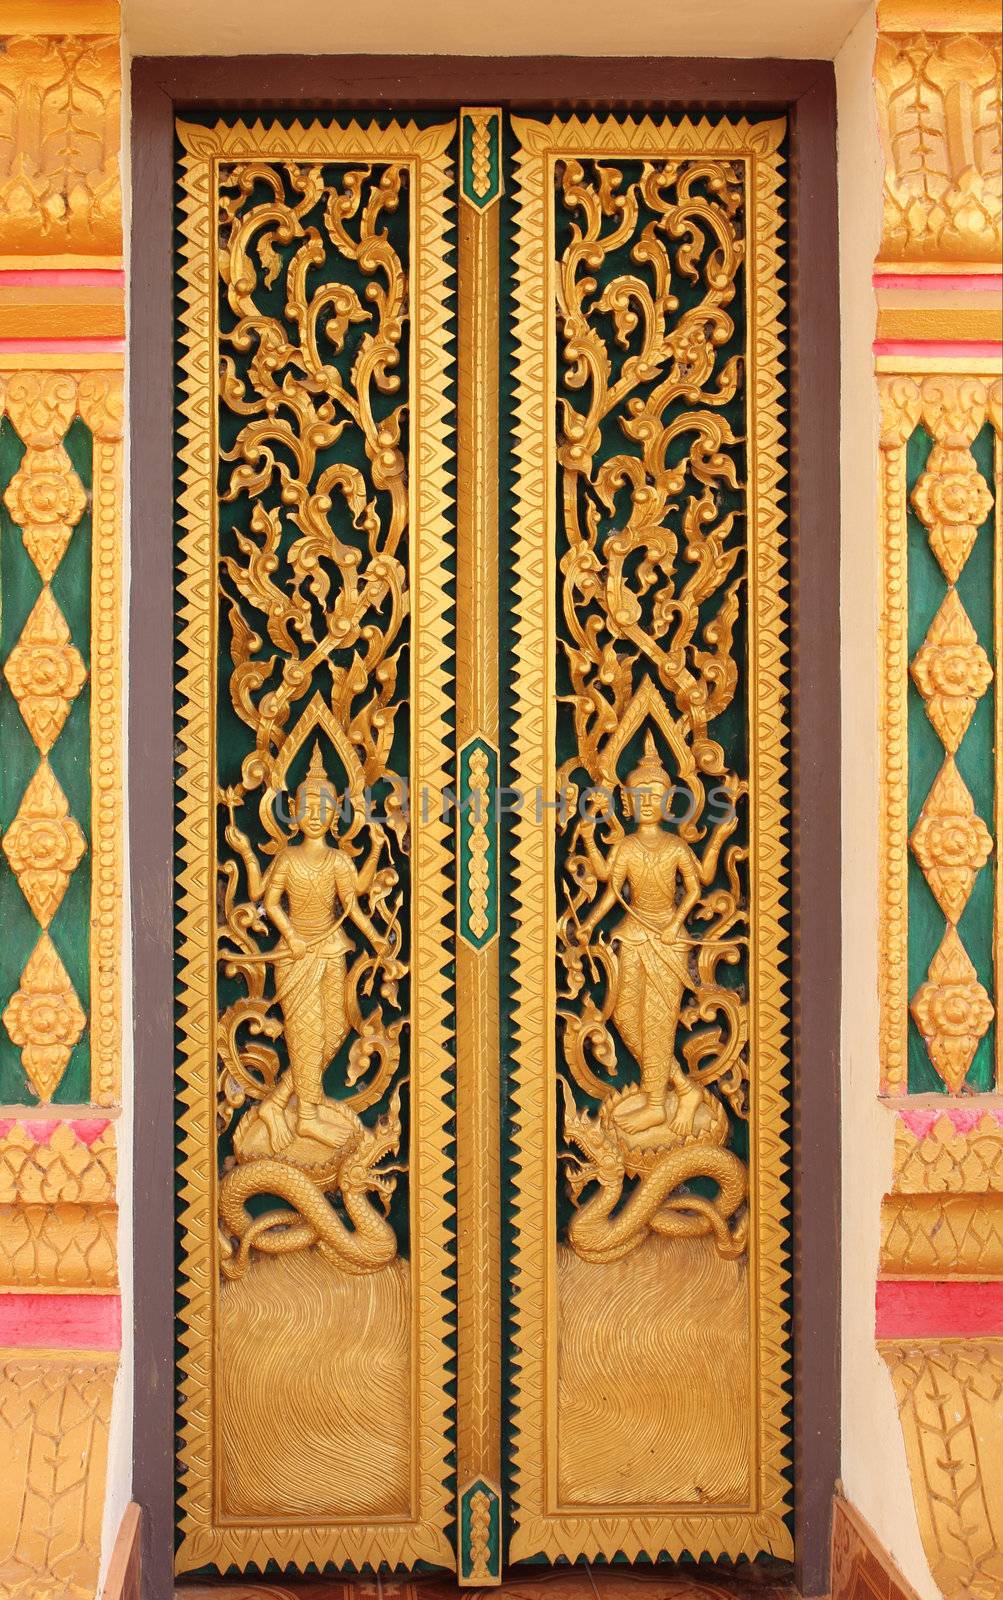 Buddhist temple door decoration in Paksong City, Champasak Province, Southern of Laos